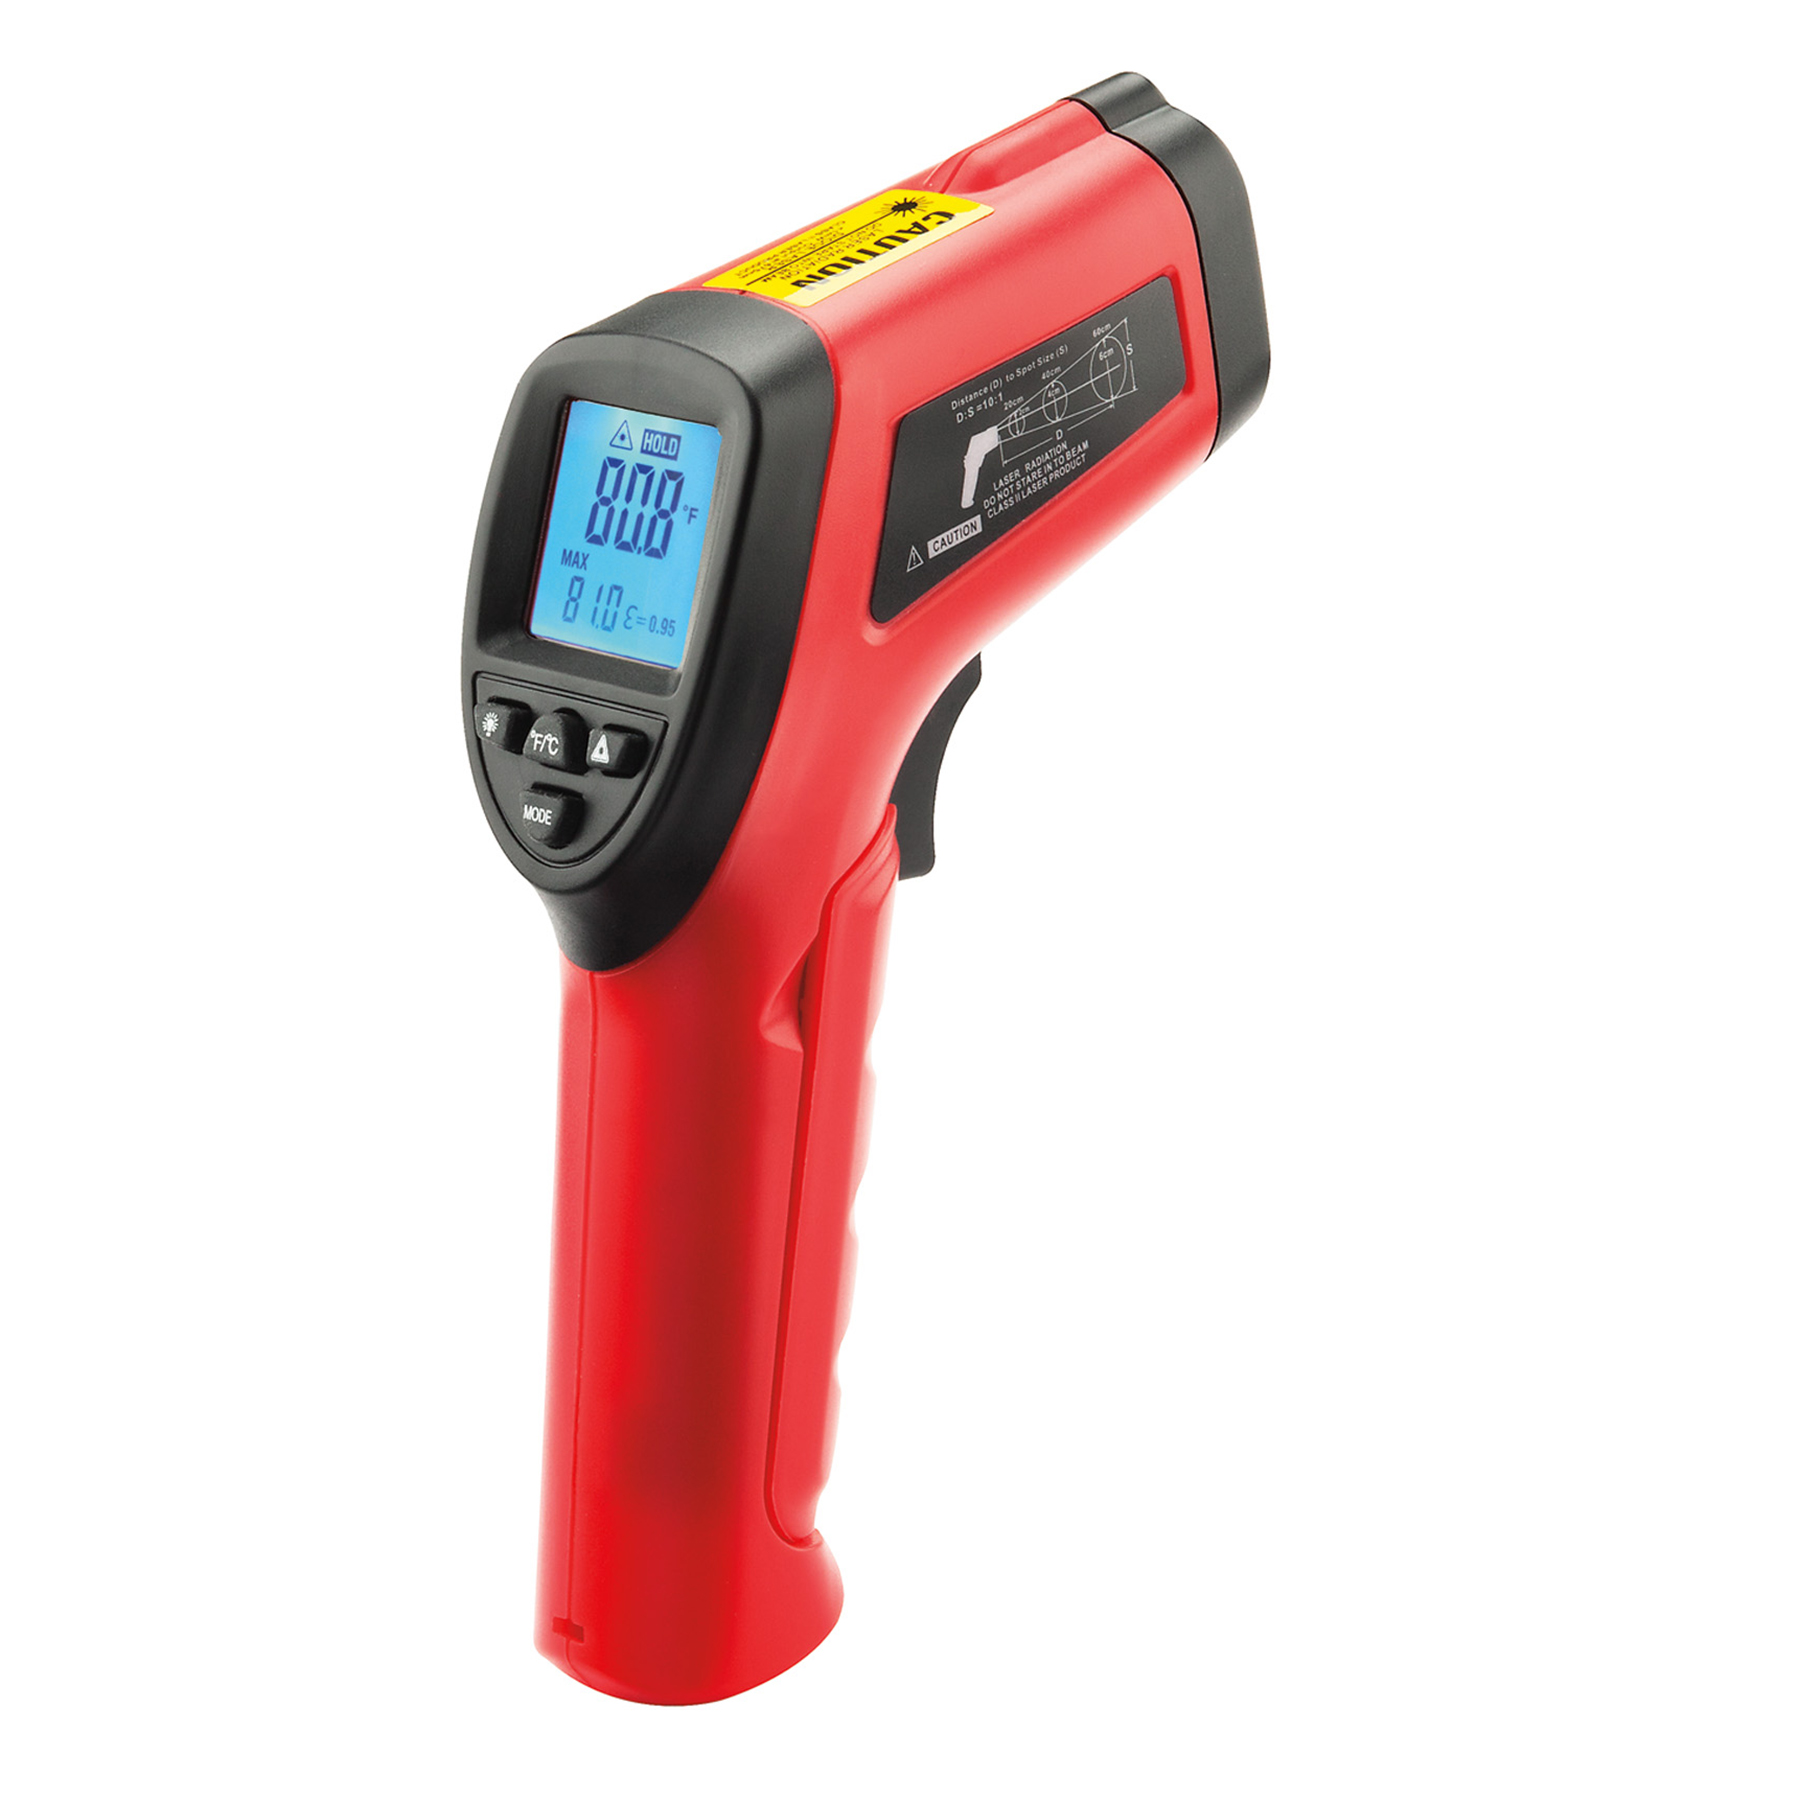 Infrared Thermometer for Grilling: Why & How to Use One?